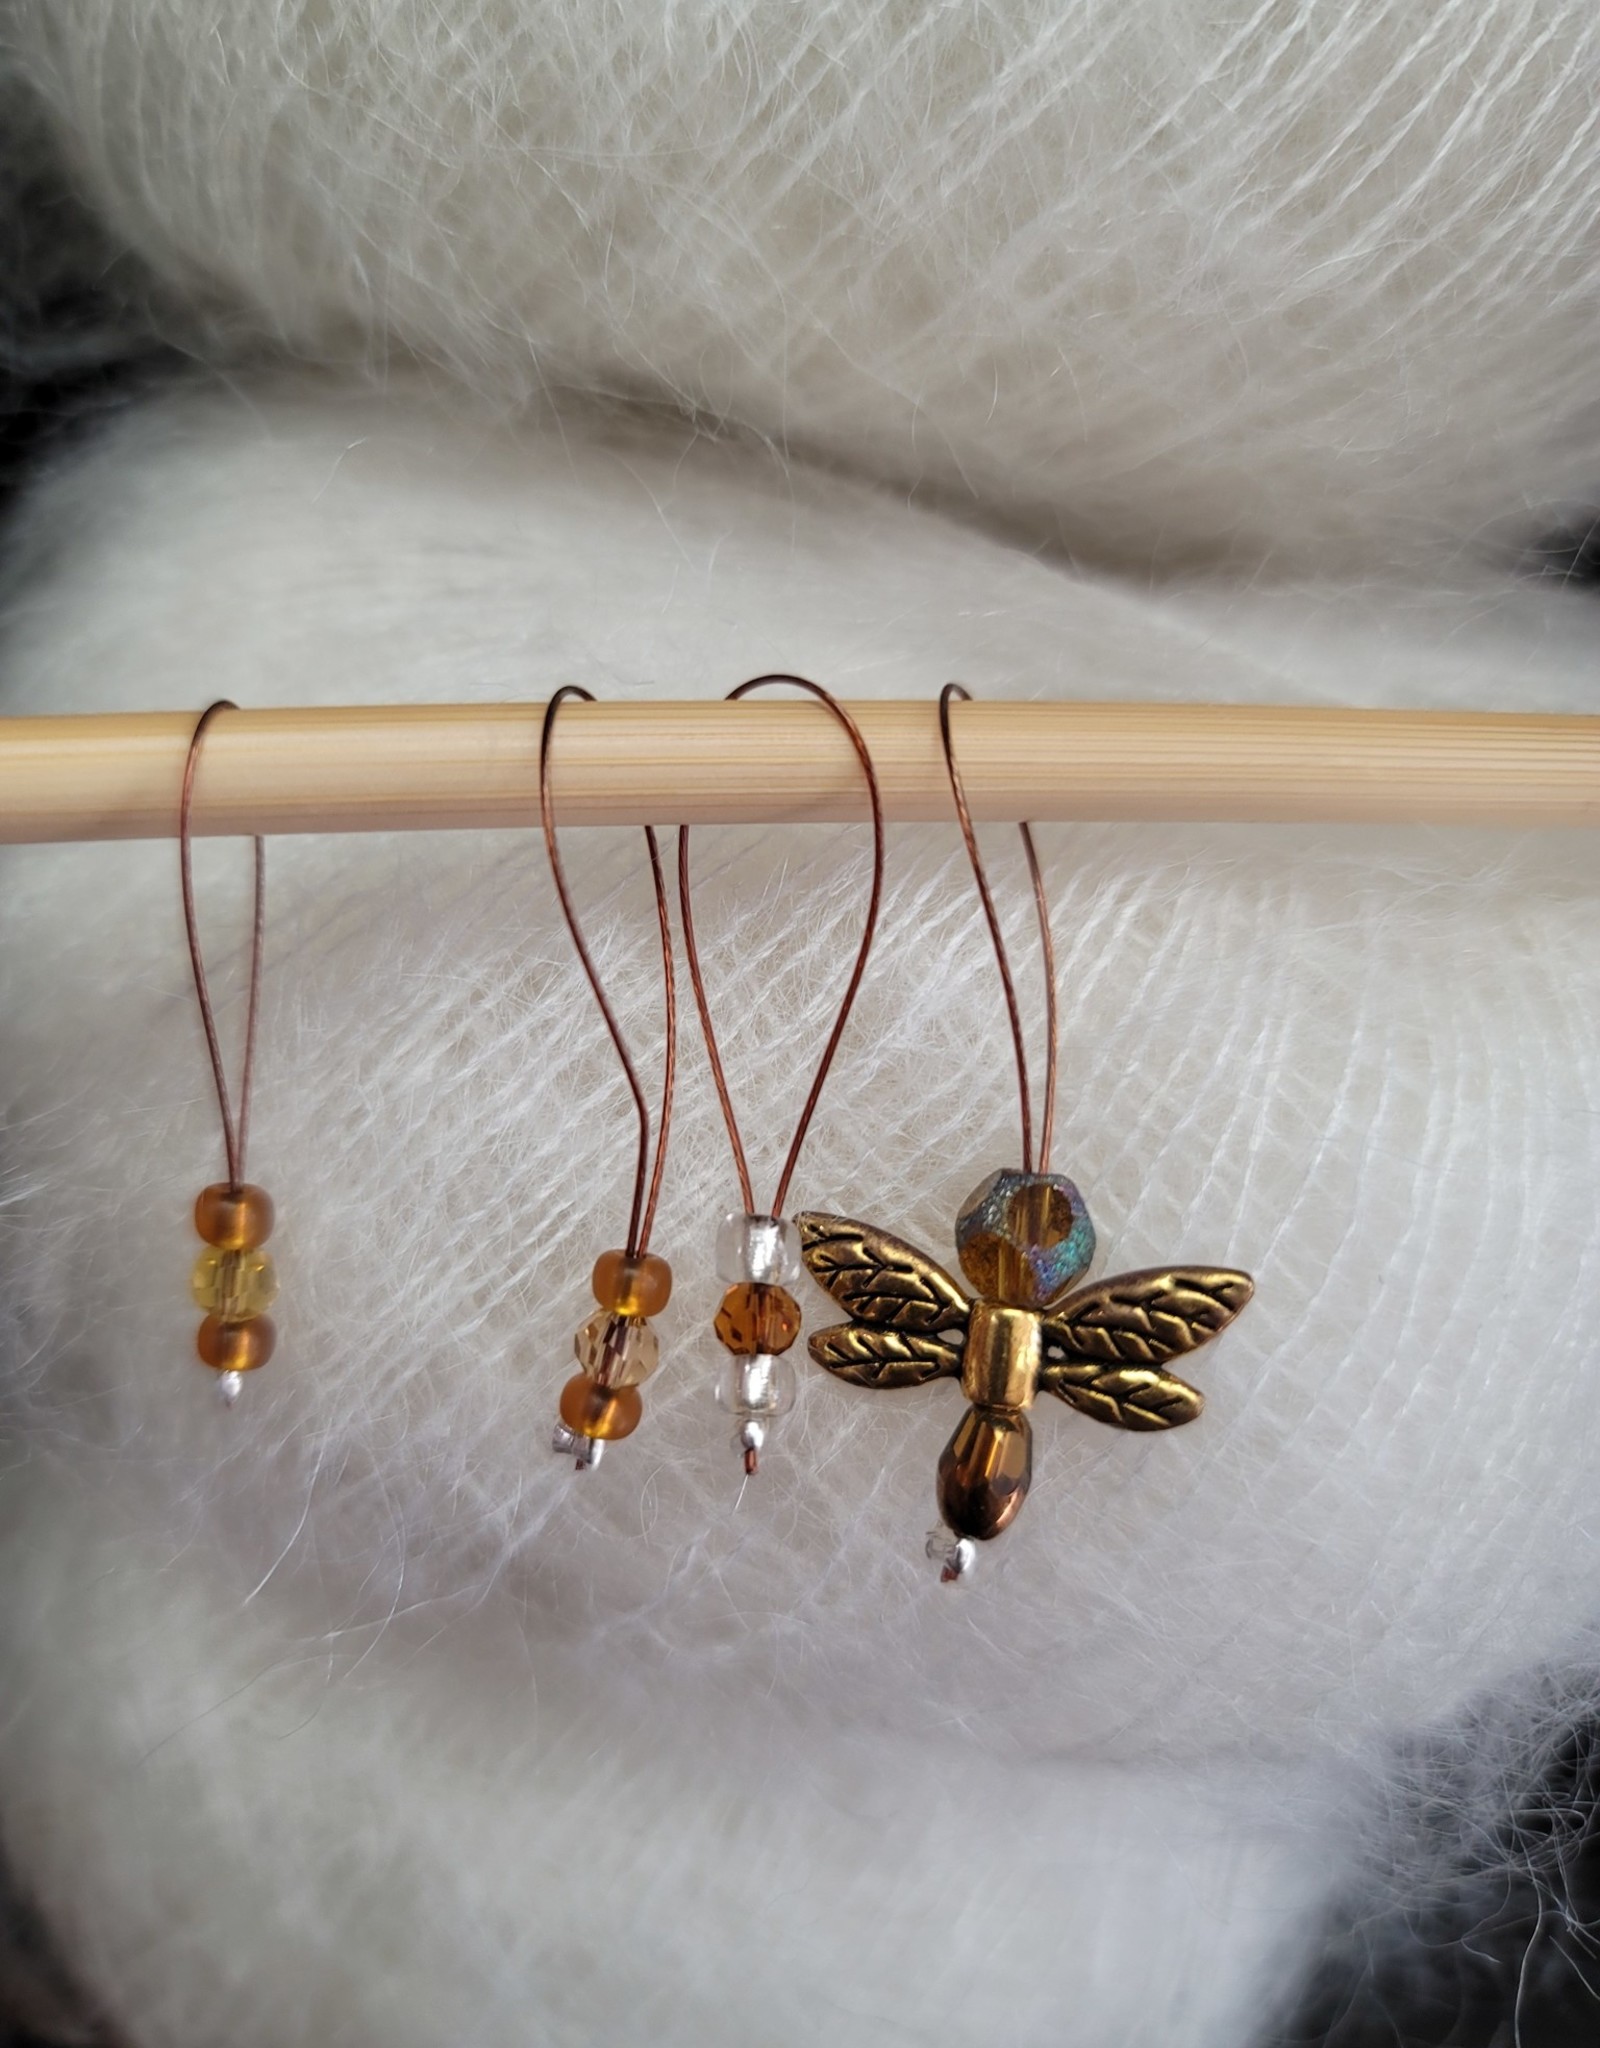 The Match Factory Stitch Markers